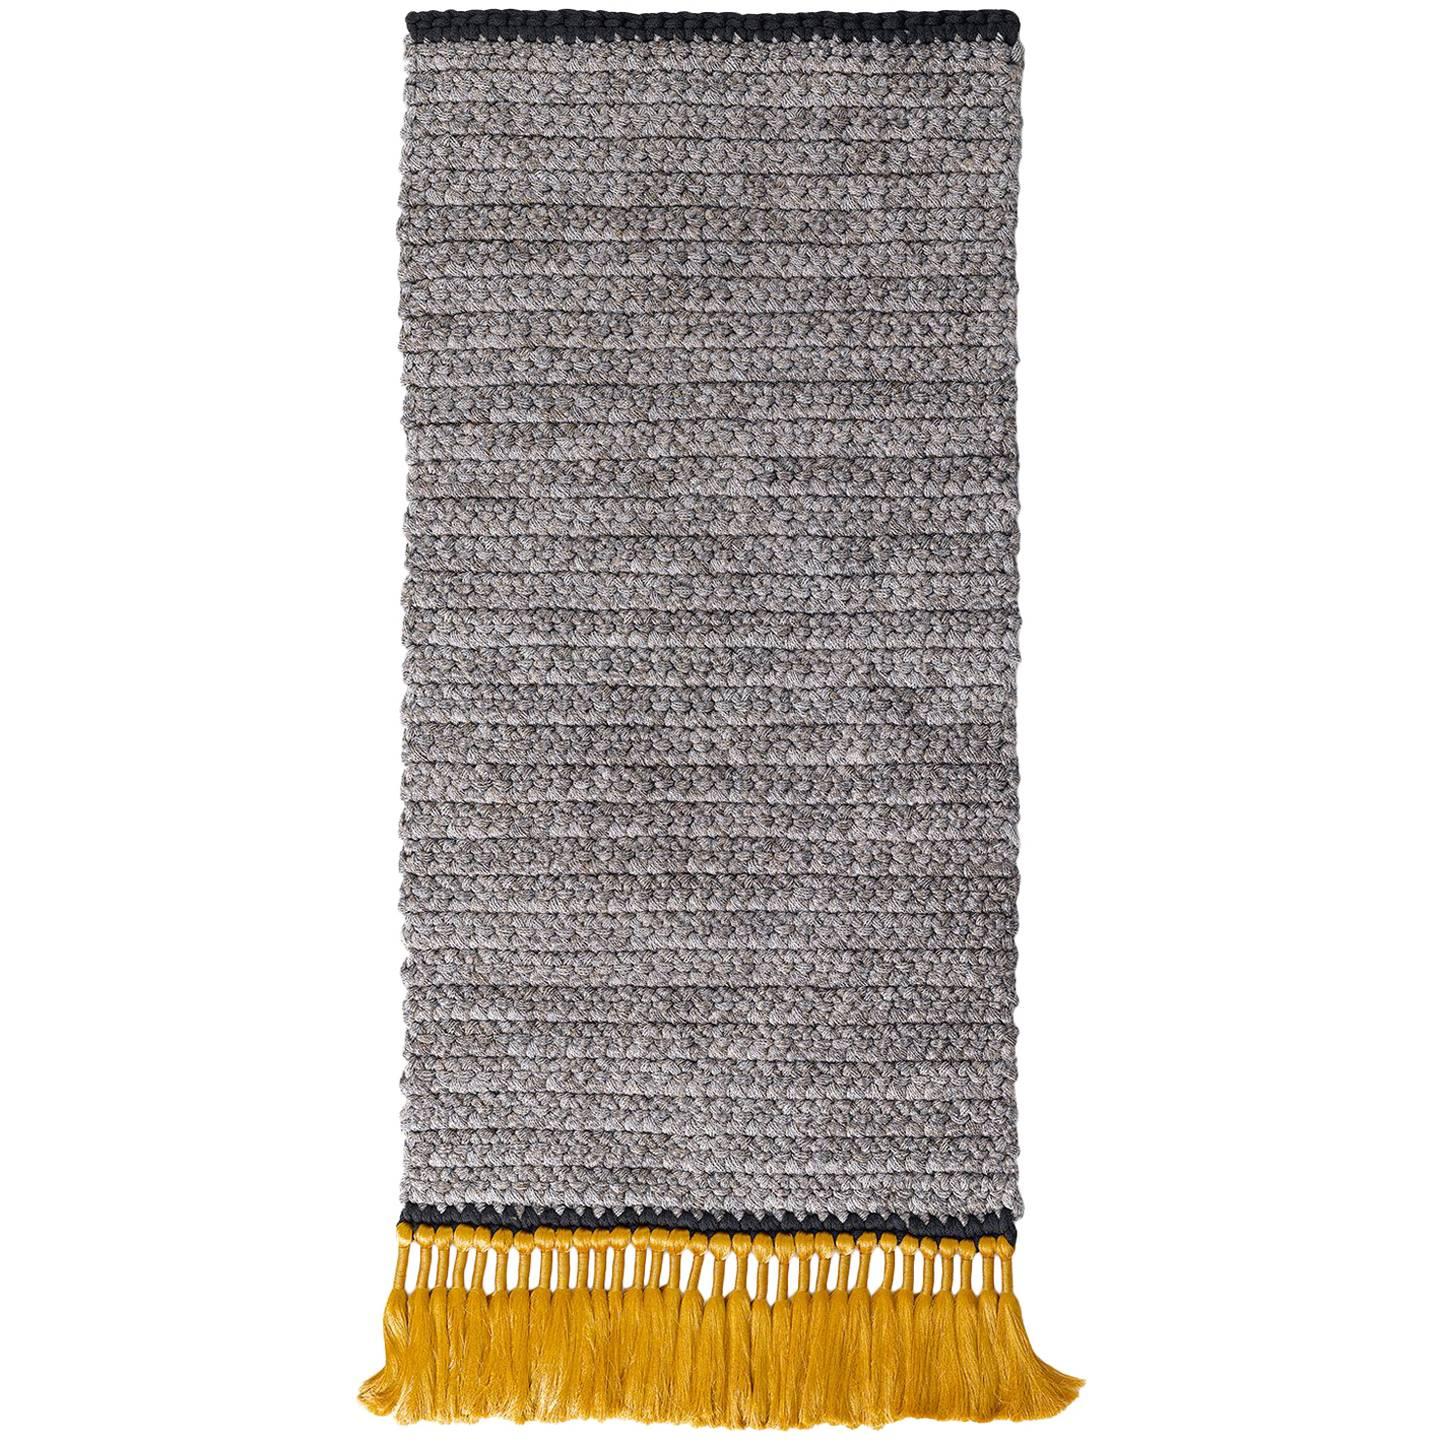 Grey and Gold Handmade Crochet Cotton and Polyester Thick Luxurious Textile Rug